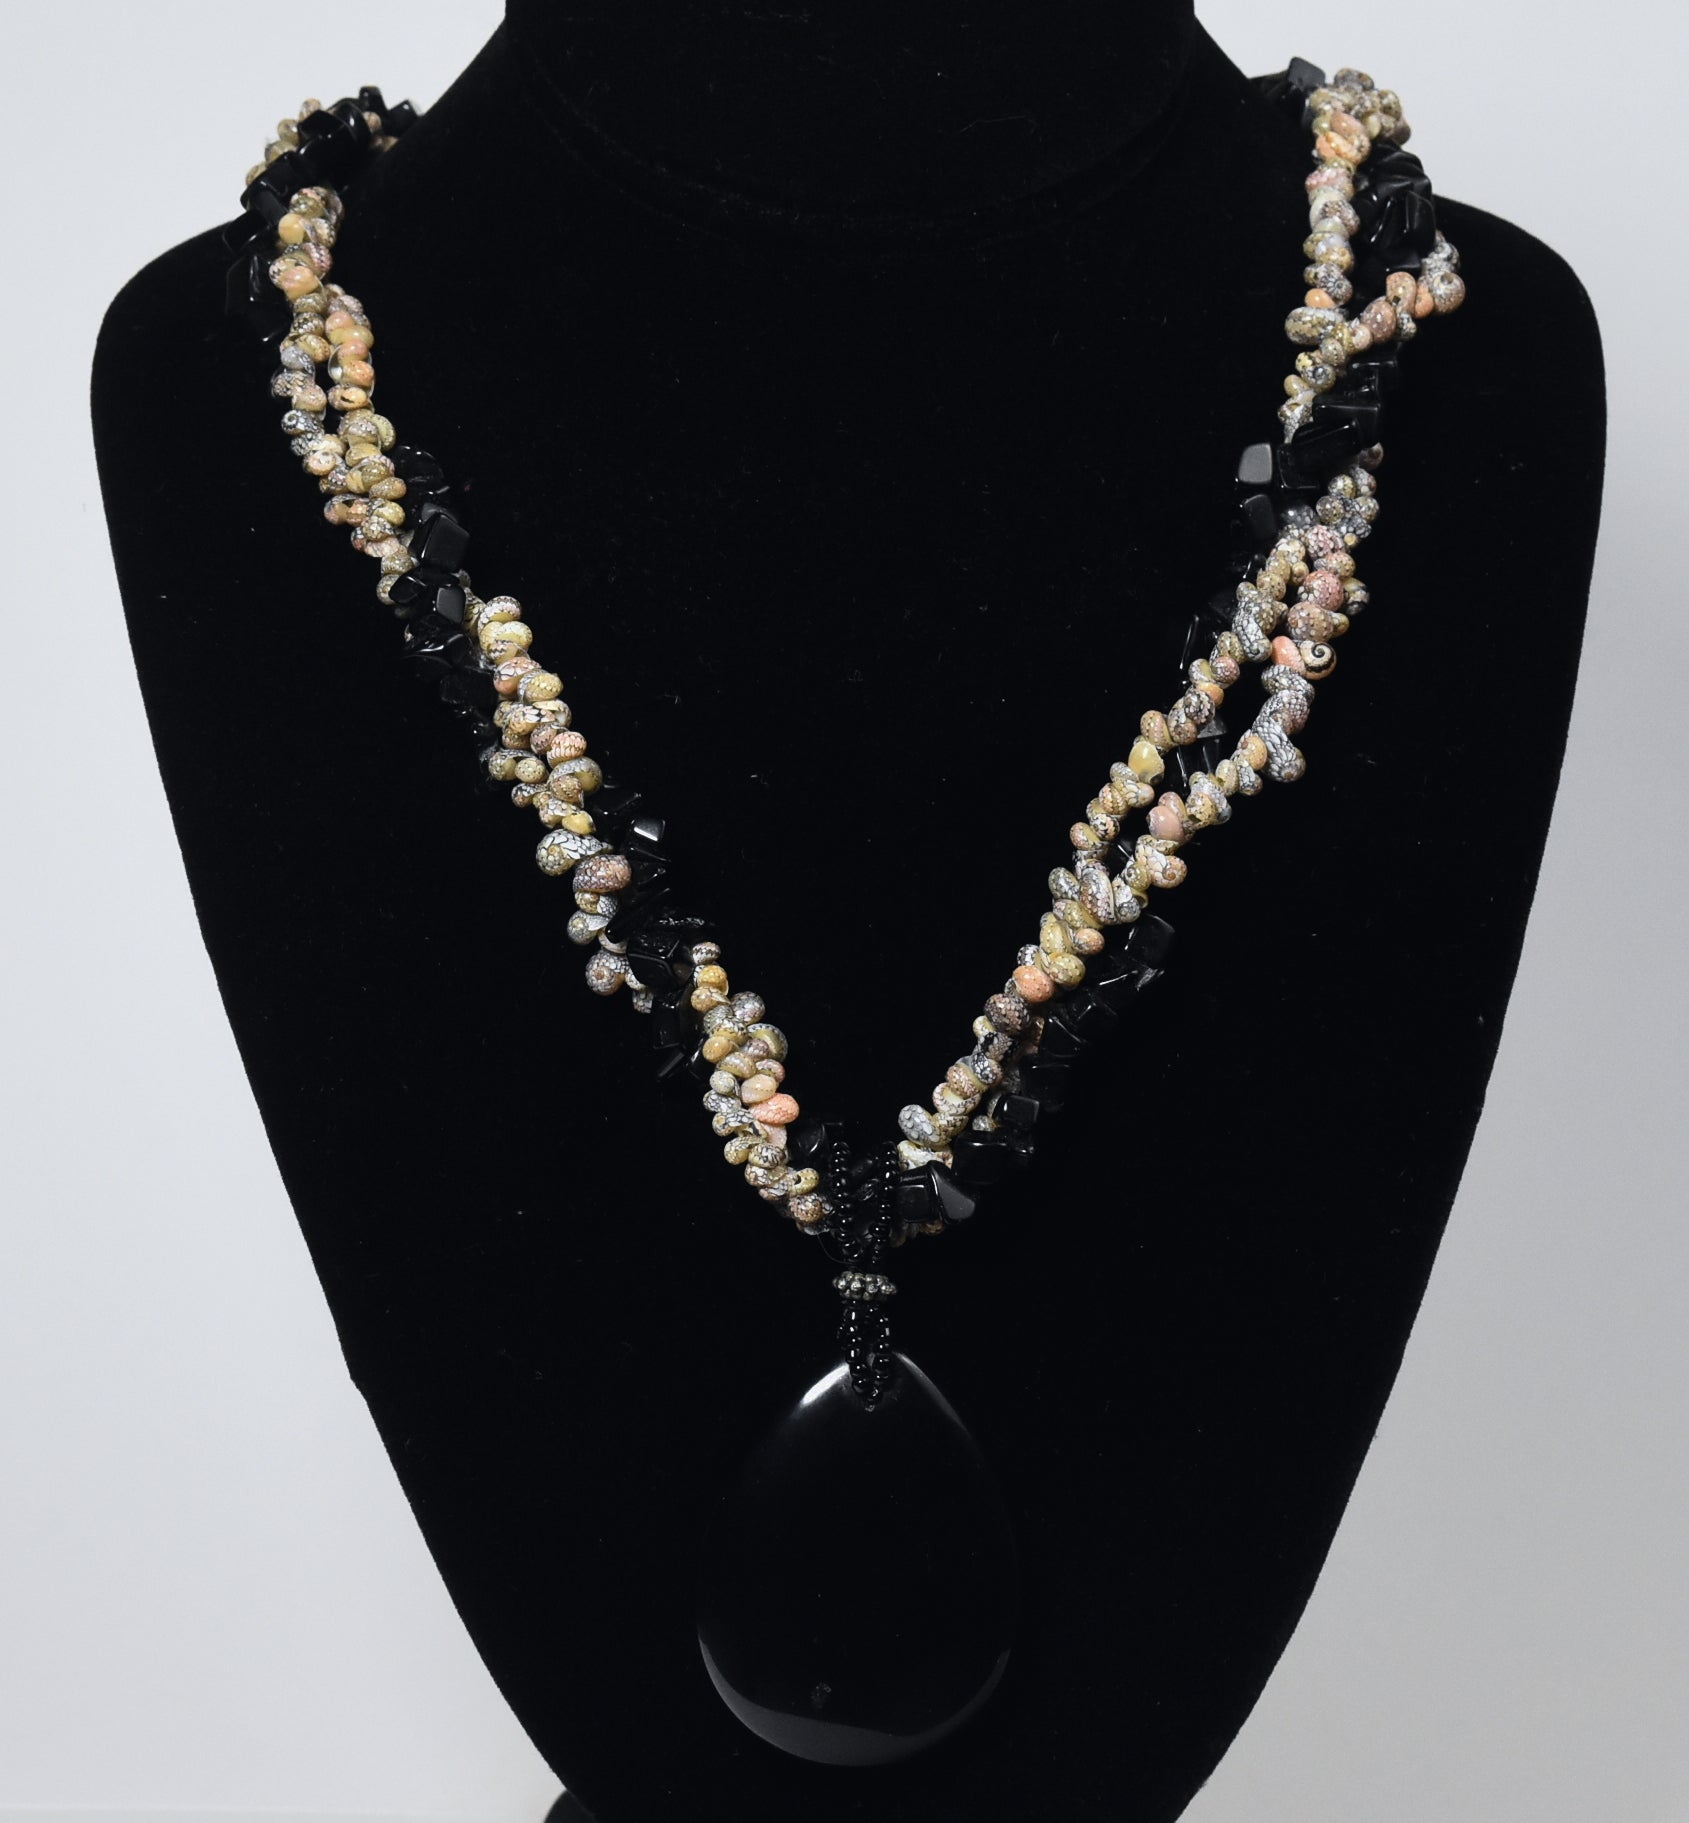 Triple Strand Shell and Black Onyx Necklace with Black Onyx Pendant